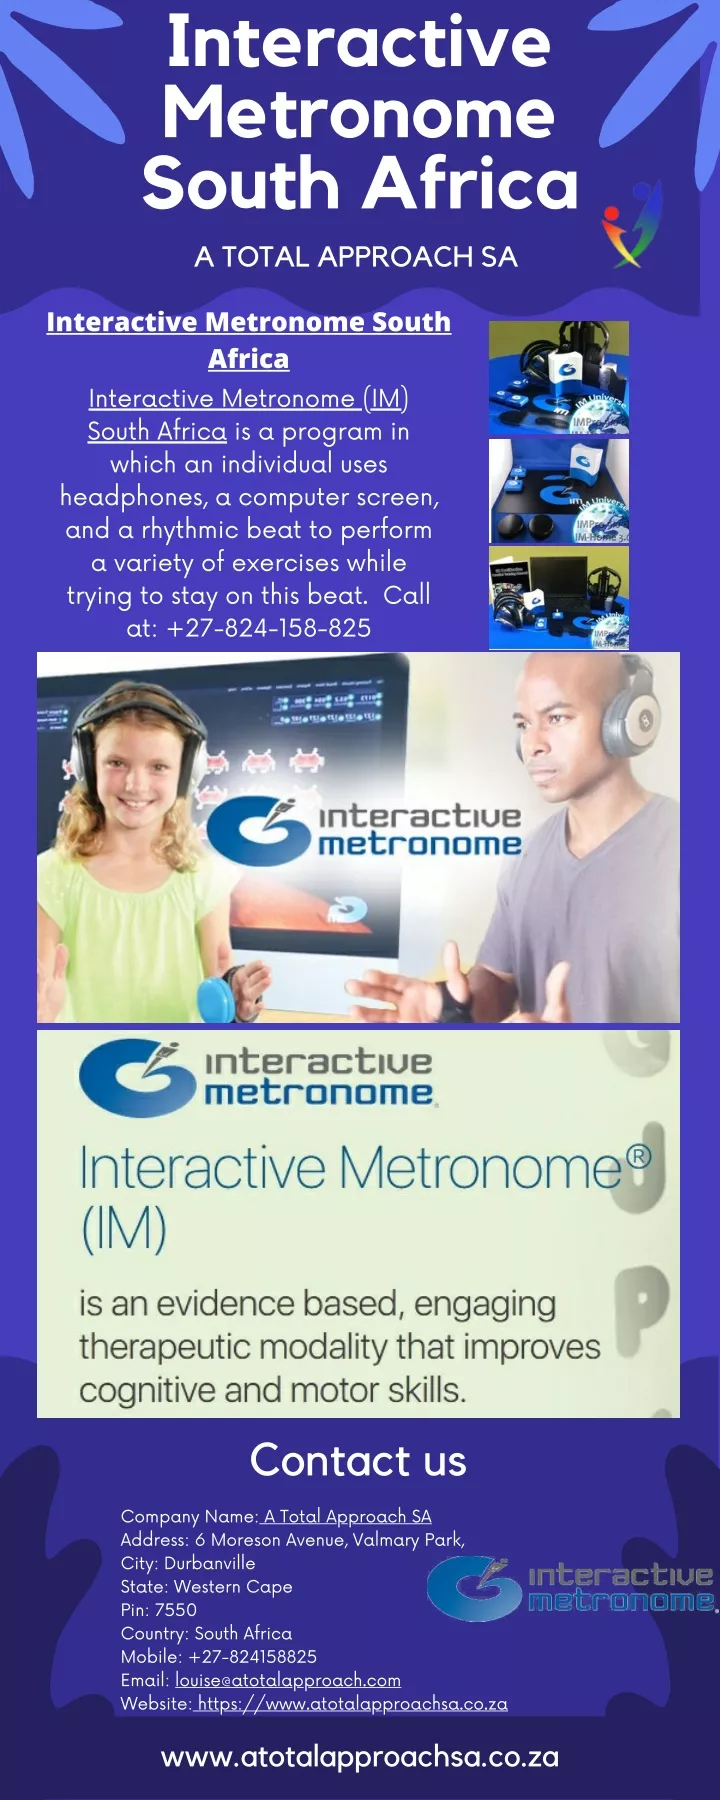 interactive metronome south africa